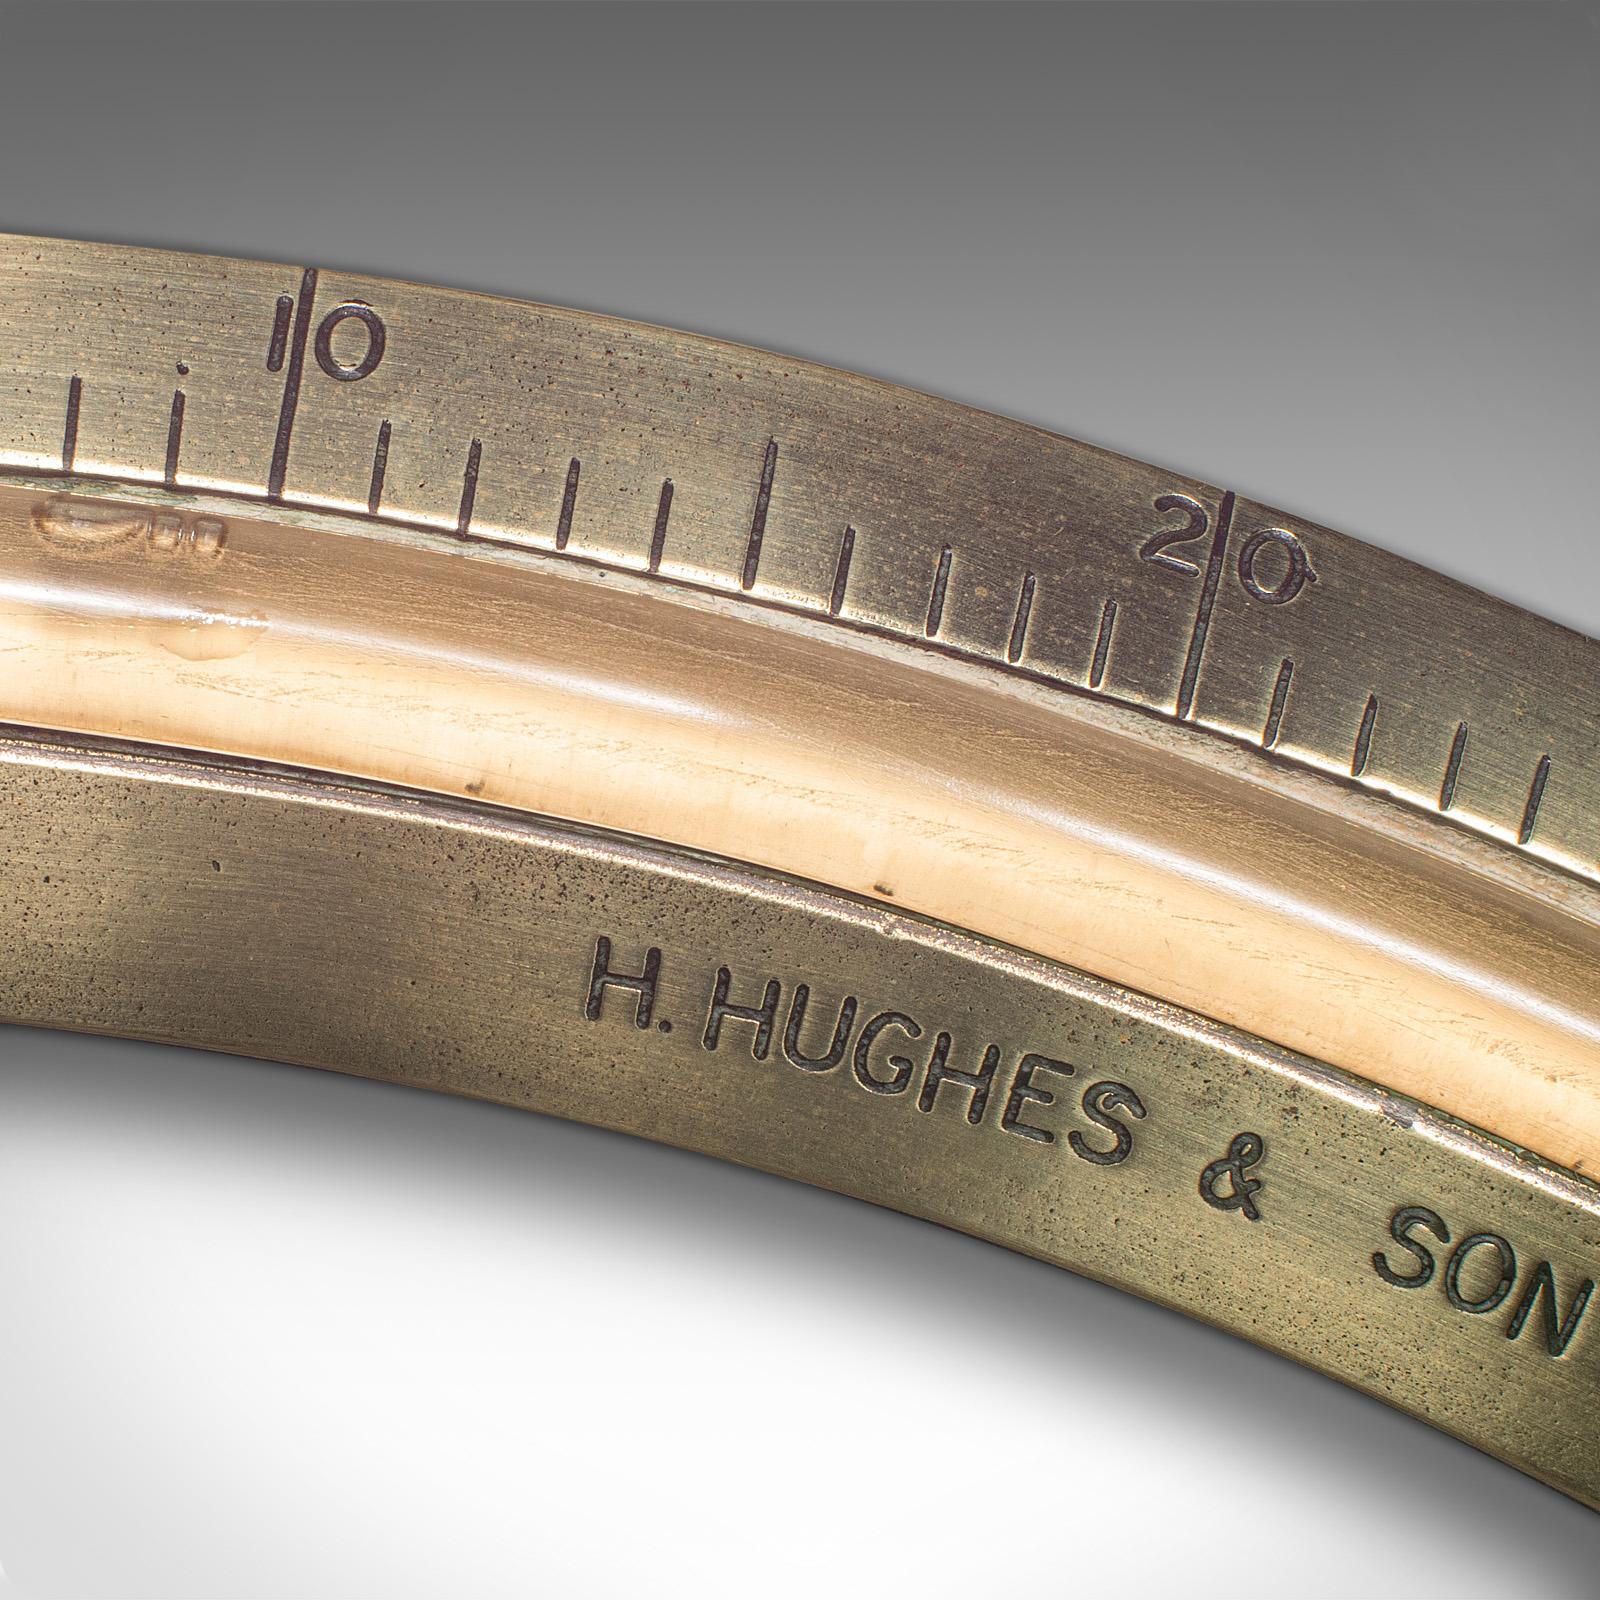 Antique Ship's Clinometer, English, Brass, Maritime Instrument, H Hughes, C.1900 For Sale 2